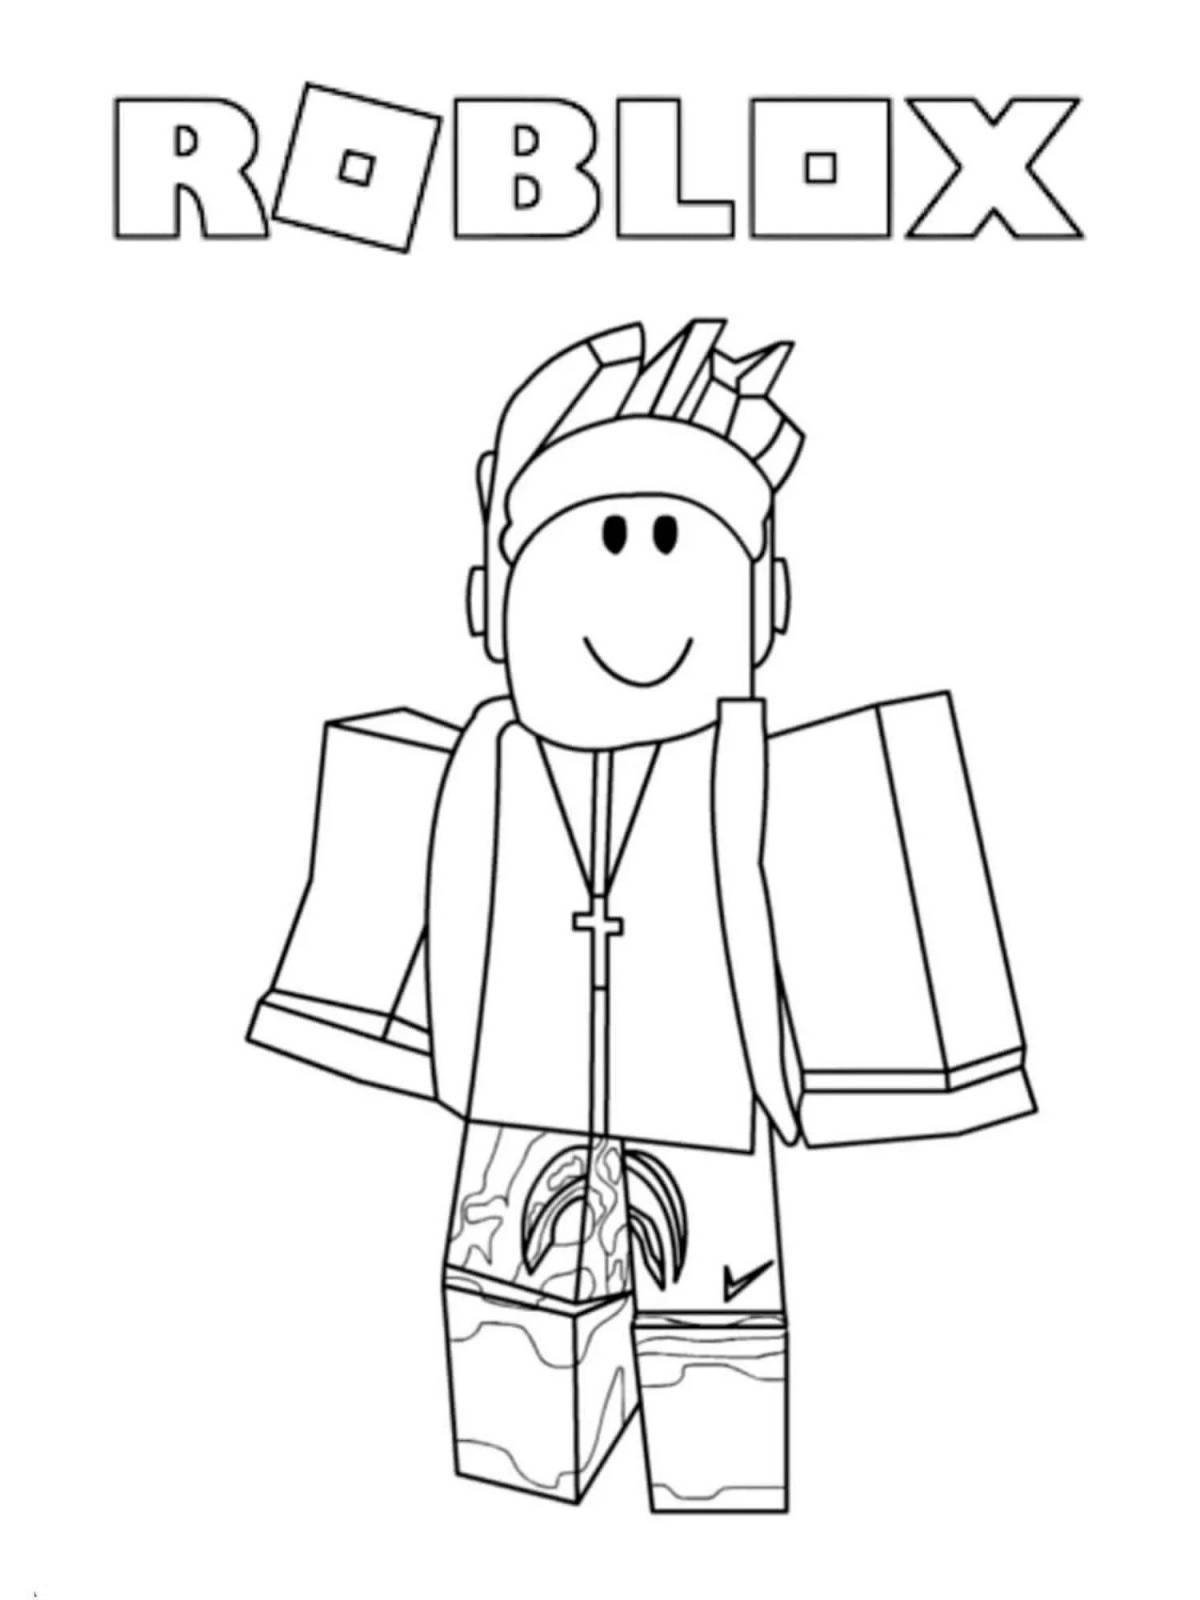 With roblox #10